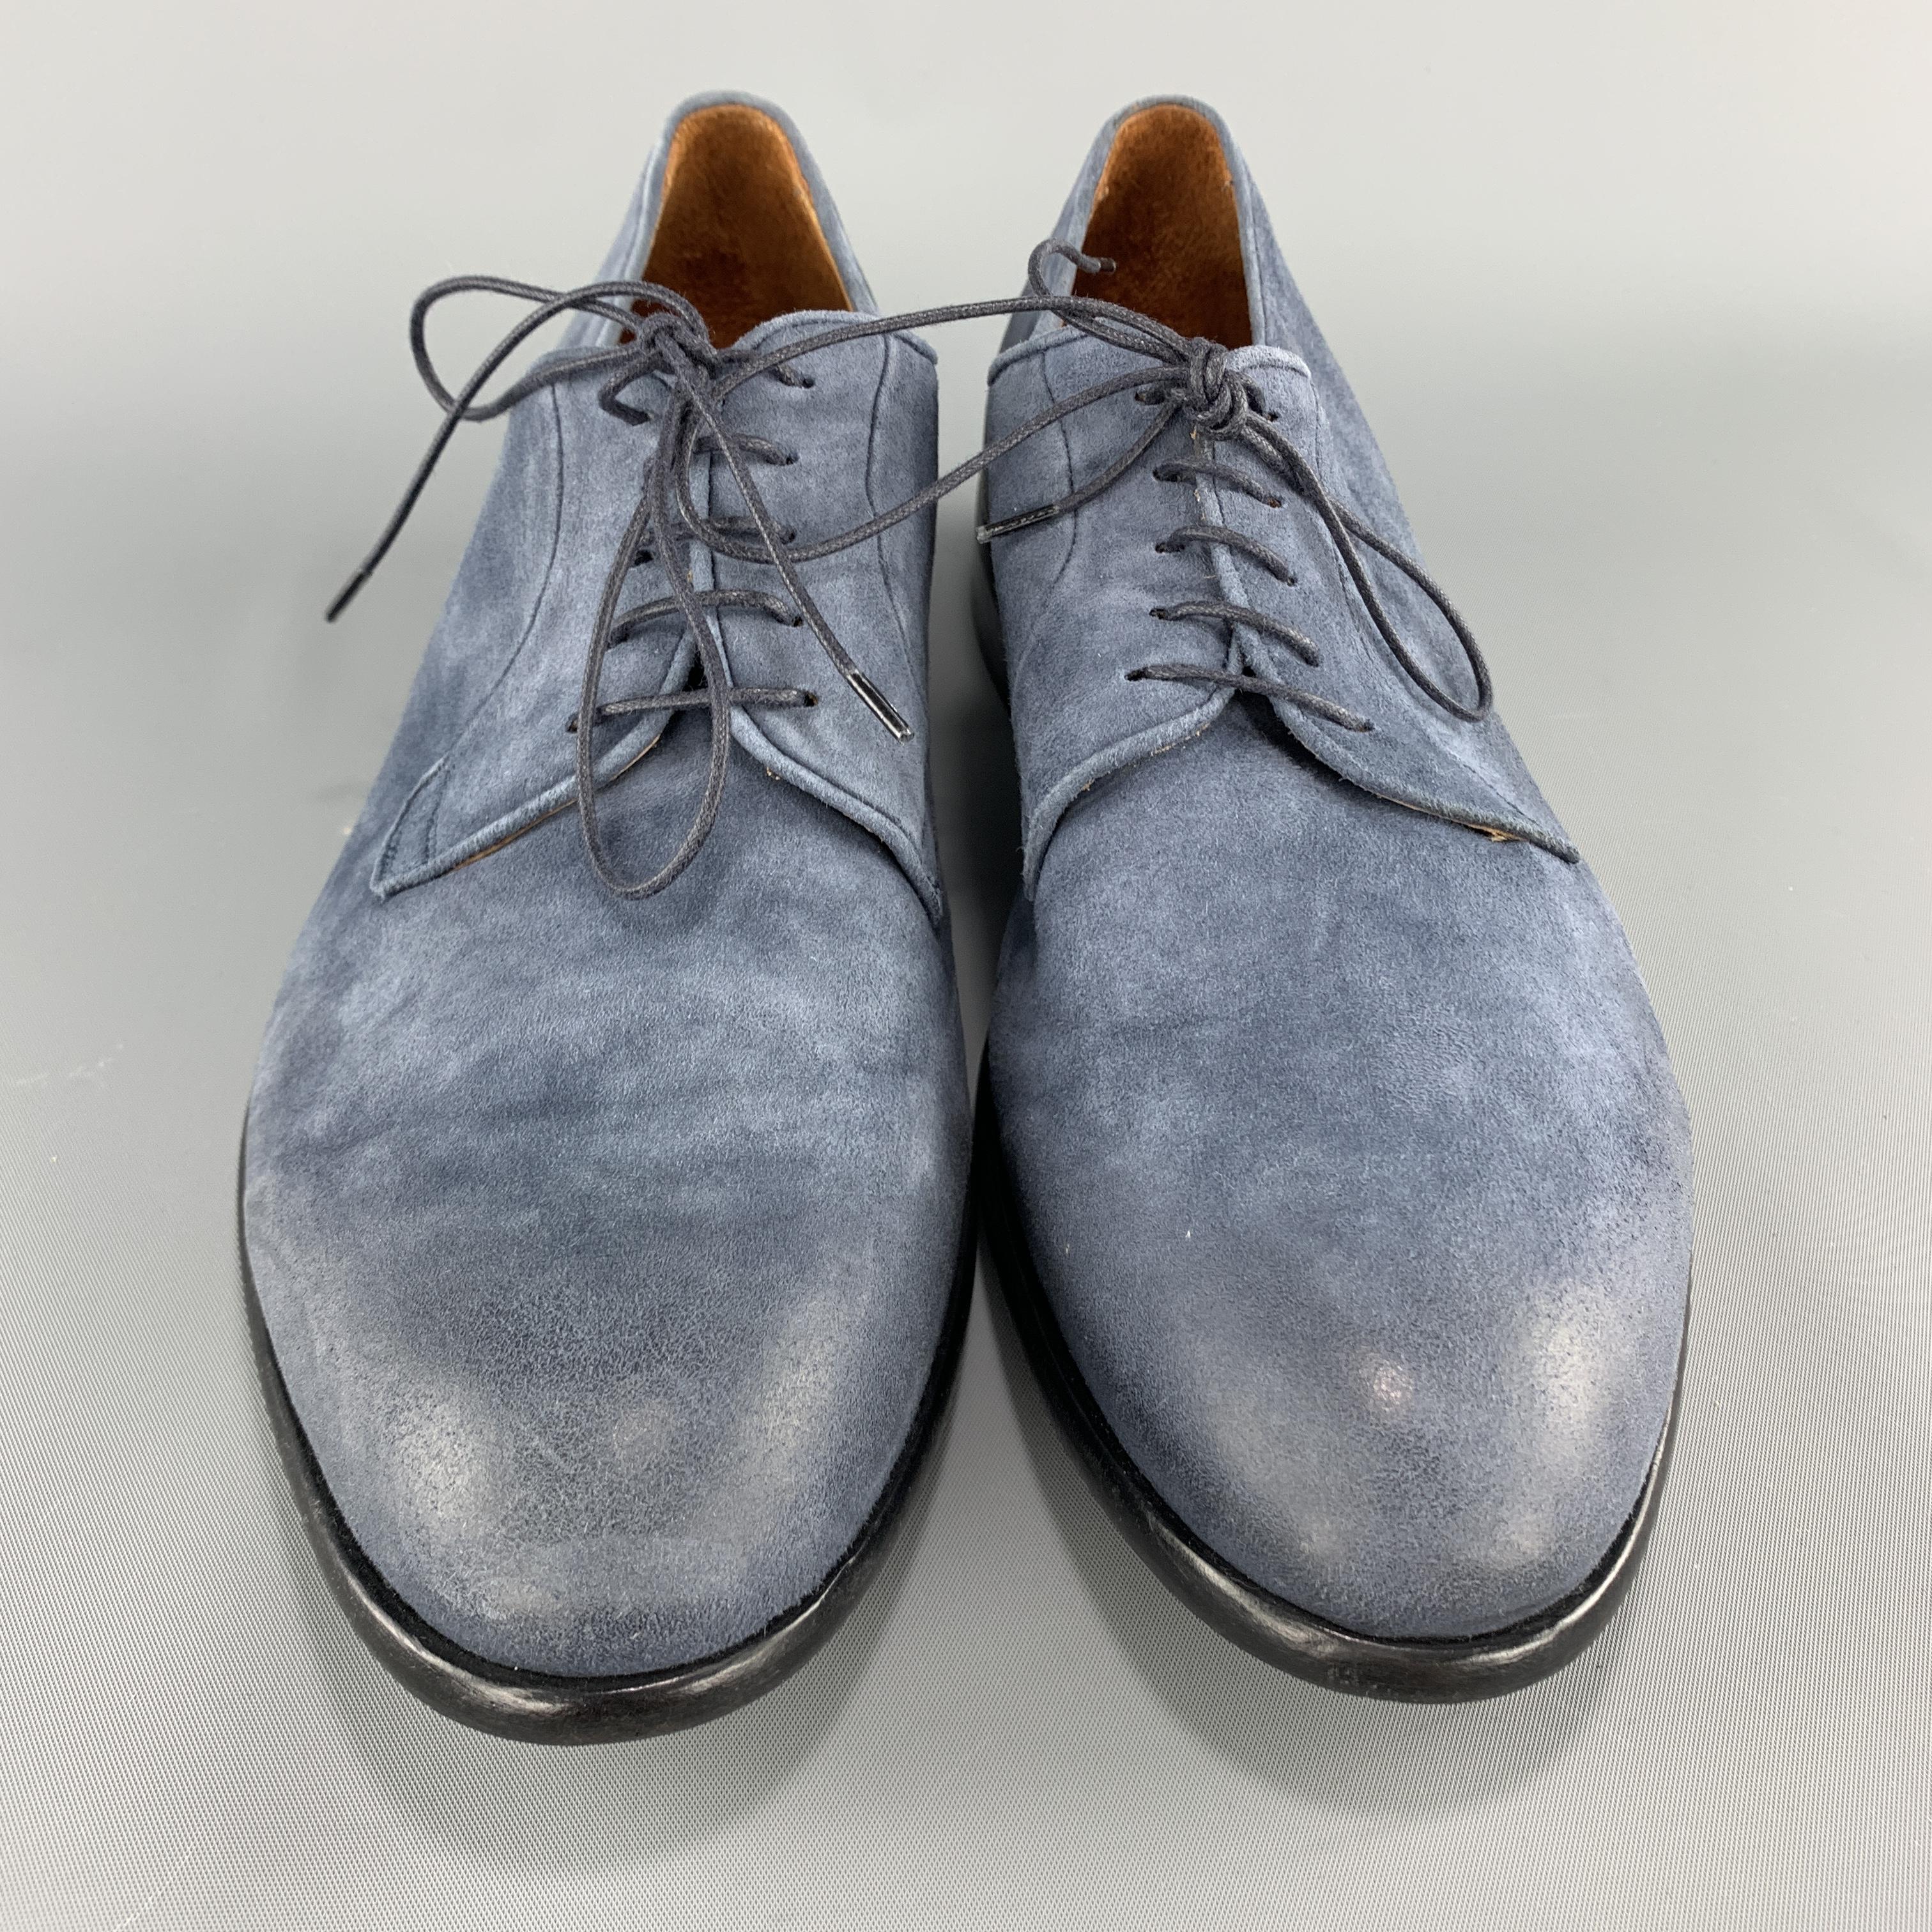 CORVARI dress shoes come in antique effect distressed denim blue suede with a black sole and lace up front. Handmade in Italy.

Very Good Pre-Owned Condition.
Marked: IT 43.5

Outsole: 12 x 4 in.